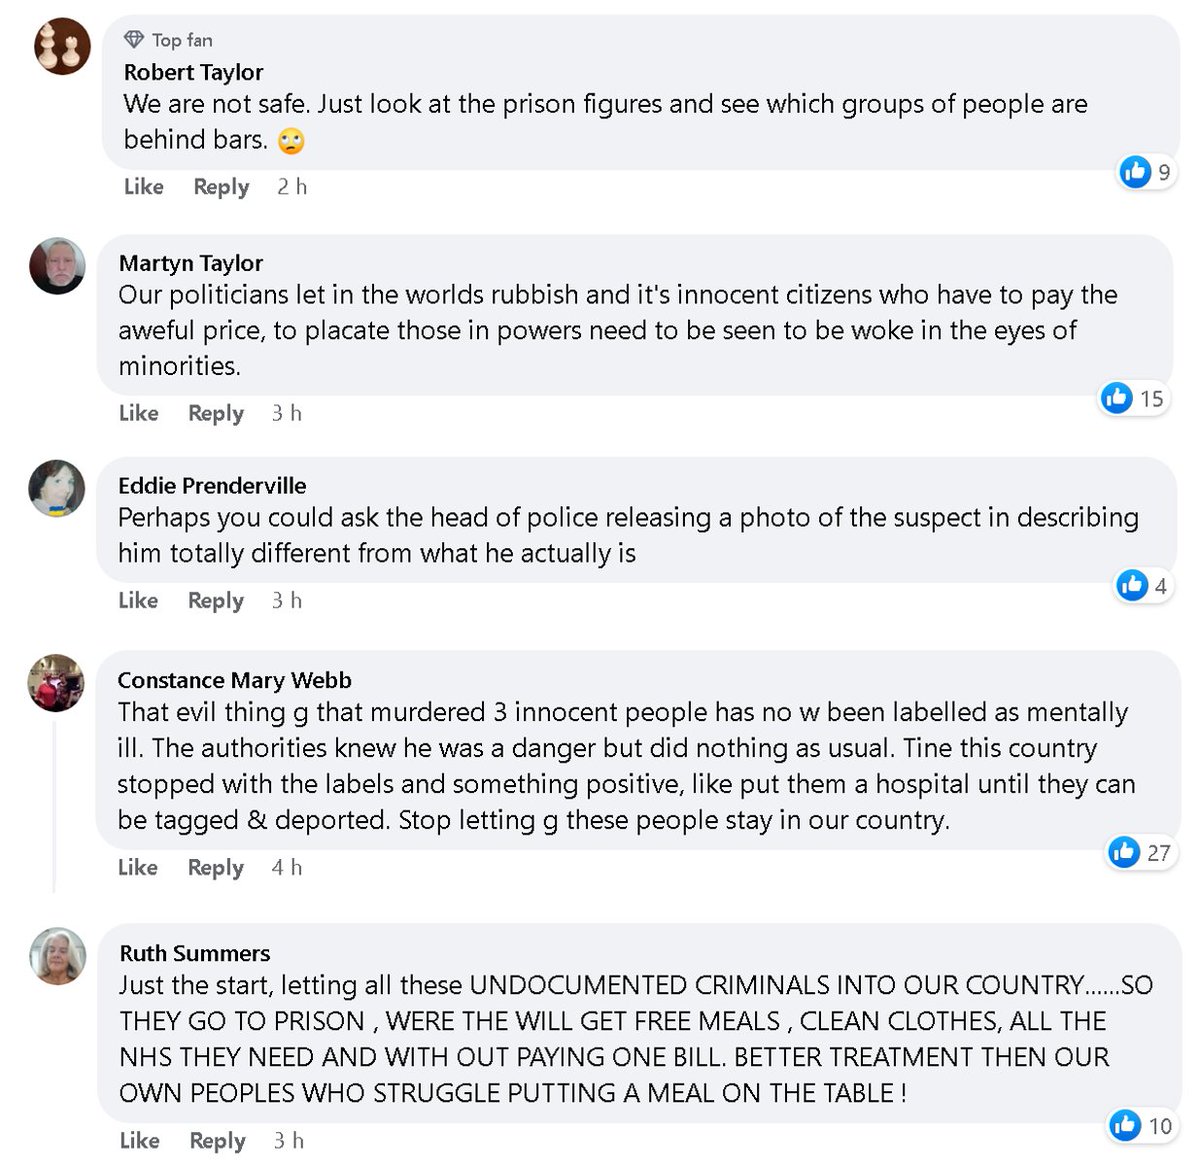 30p Lee Anderson's Facebook simpletons, bigots, and racists giving Jonathan Gullis's lot a run for their money. 
BTW the UK prison population is 88% British/73% White.
#ToriesOut343 #30pLee #ToryBritain